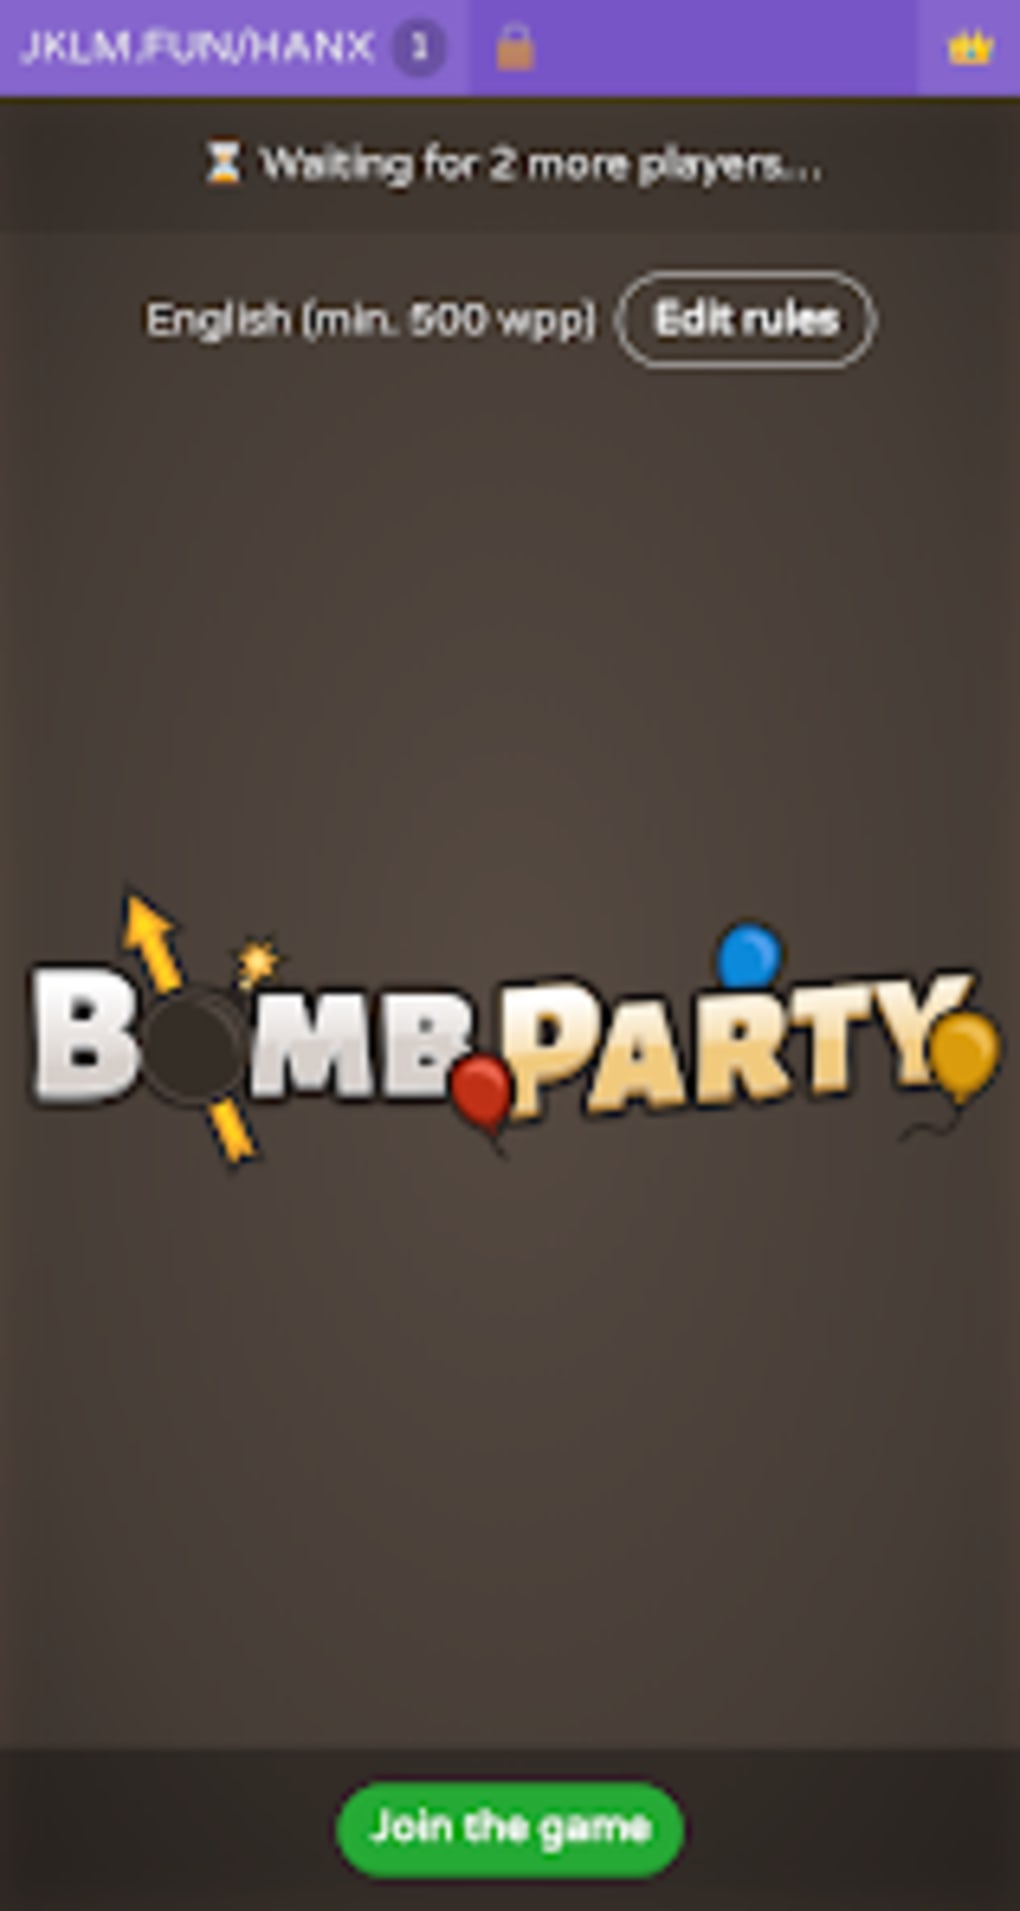 Party games for PC & Smartphone. BombParty, Master of the